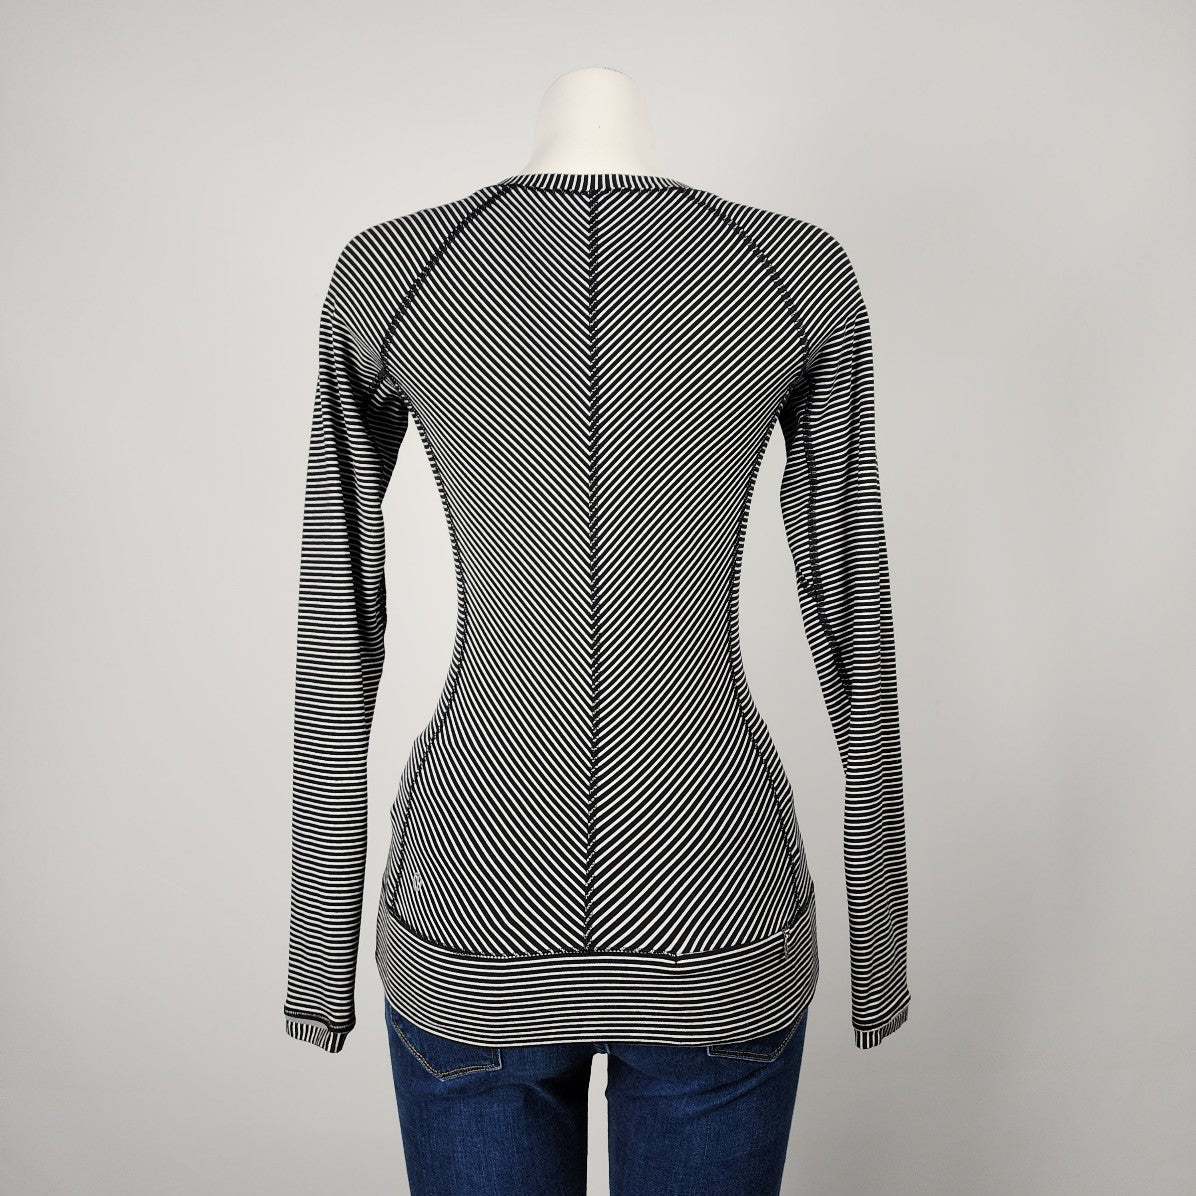 Lululemon Black Striped Race Your Pace Long Sleeve Top Size S